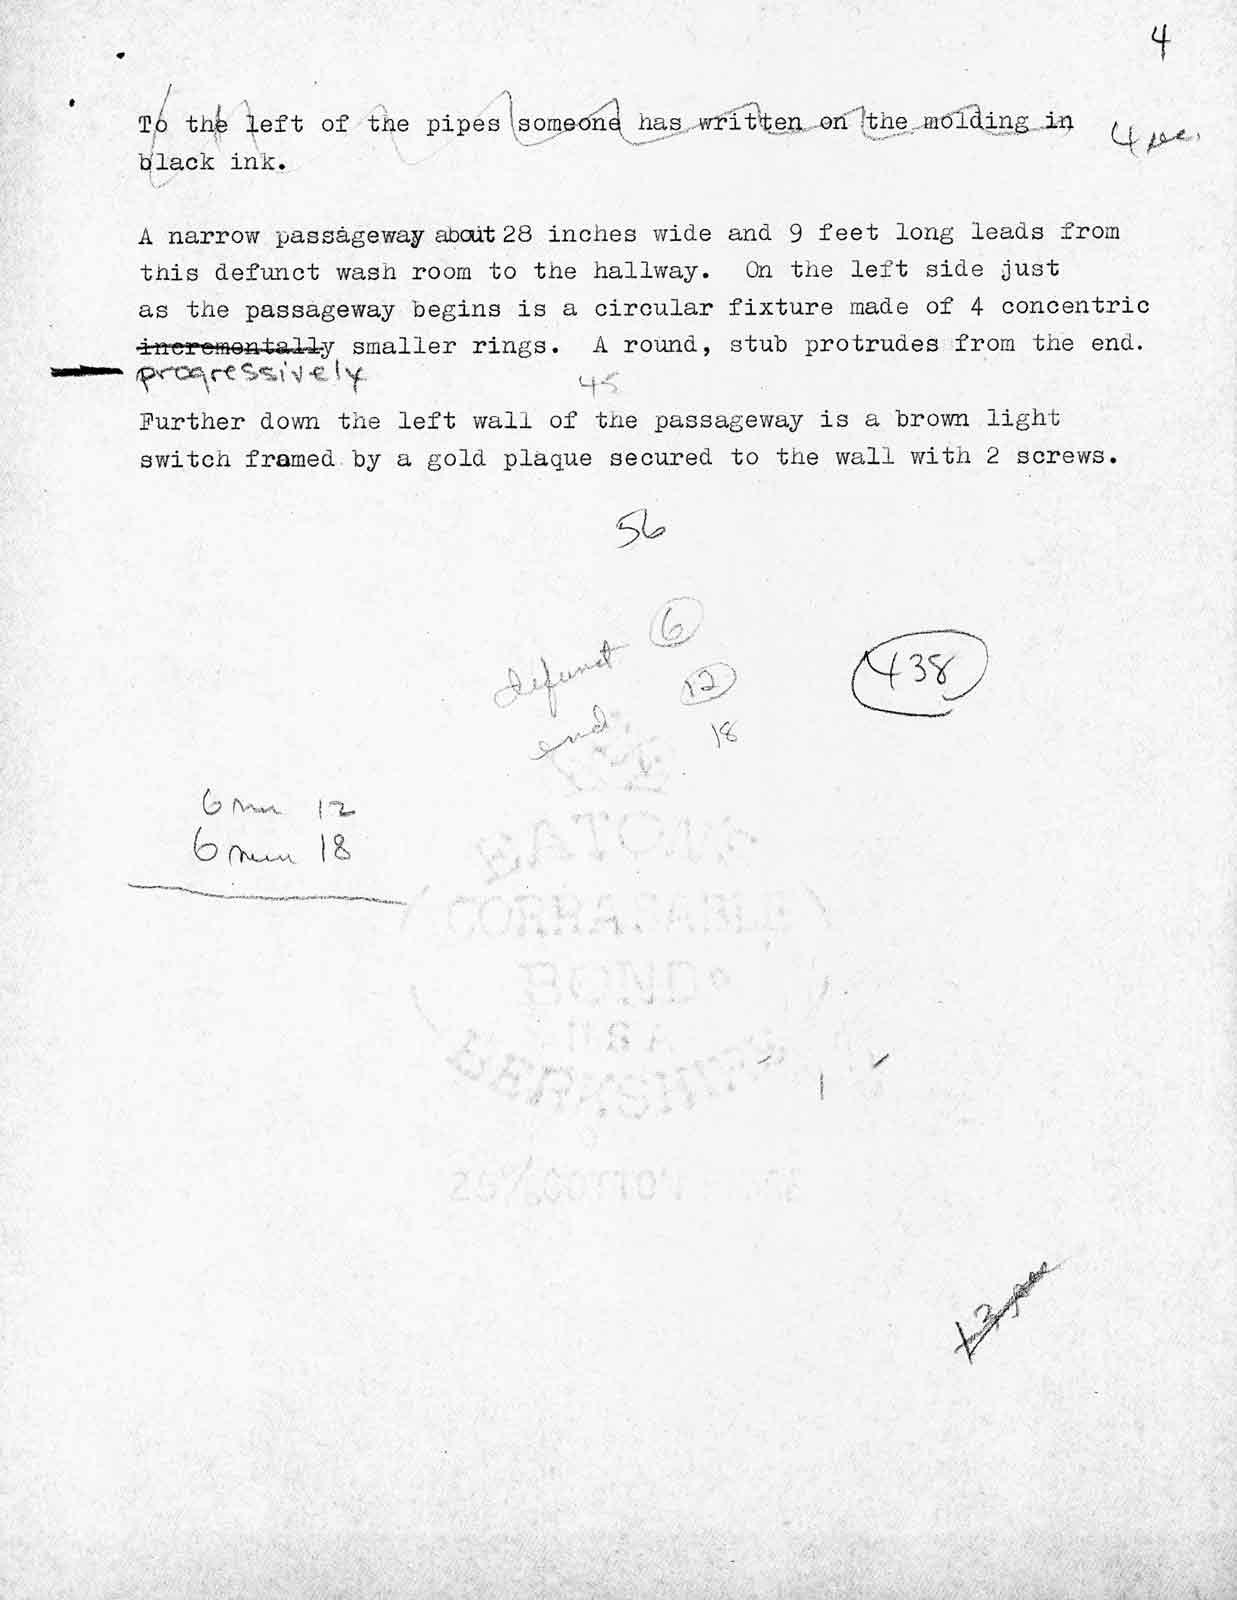 Typewritten text with hand annotation of a visual tour given by Nancy Holt at P.S.1 in New York City, 1977